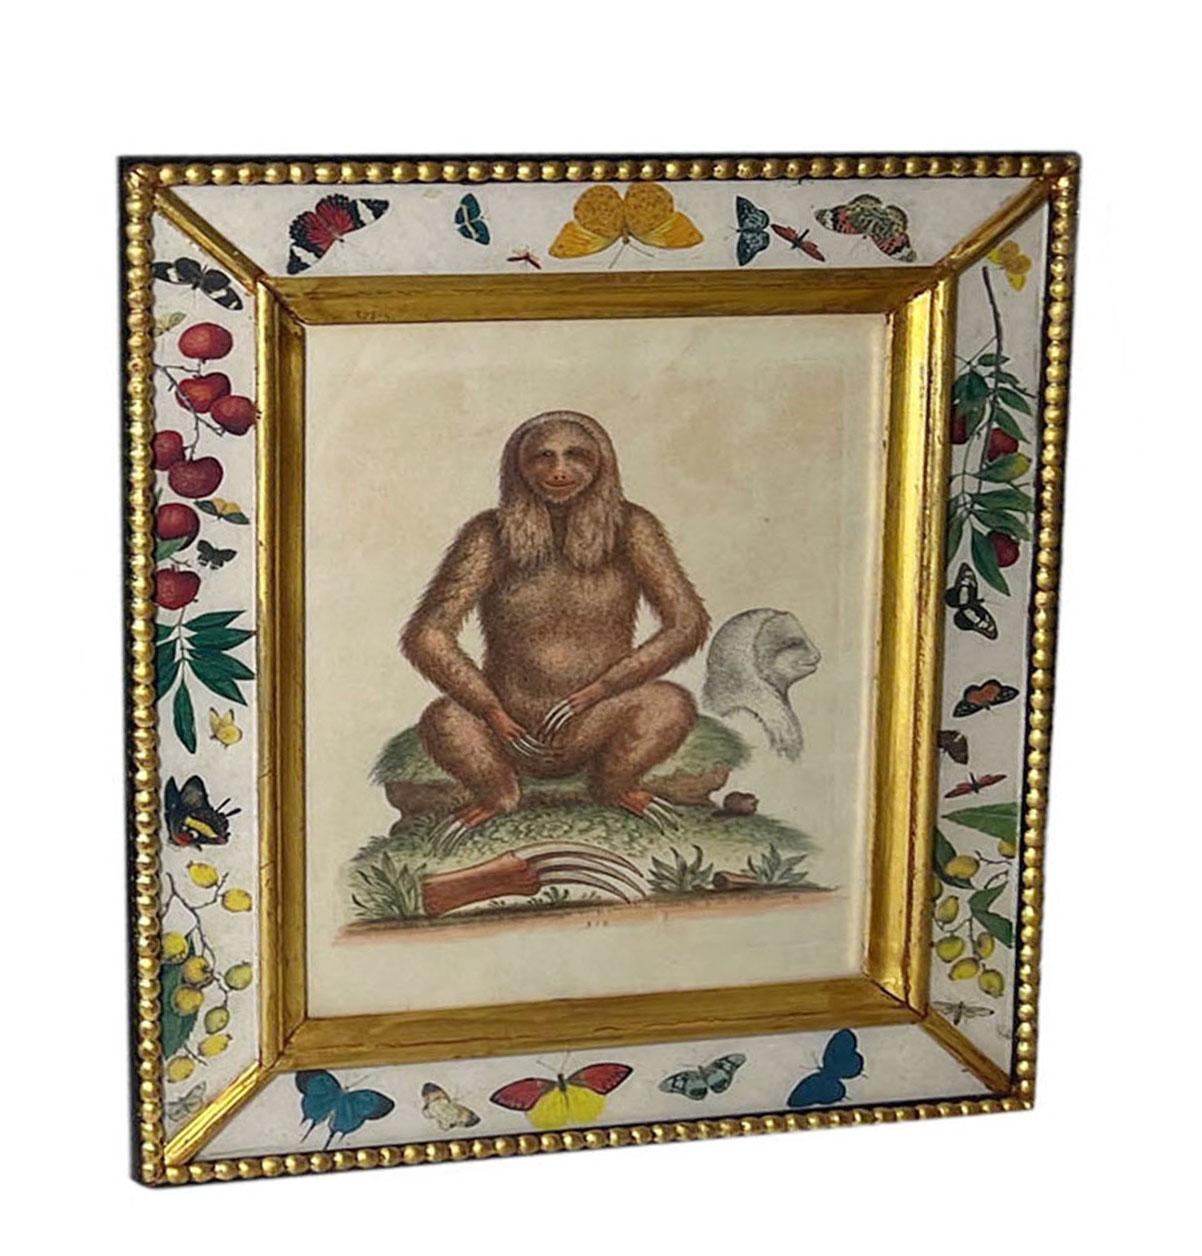 An antique engraving of a monkey called Sloth dated 1758 signed Edward Delin Anno. In a newer eglomise and guided wood frame with fruits, leaves and insects.
